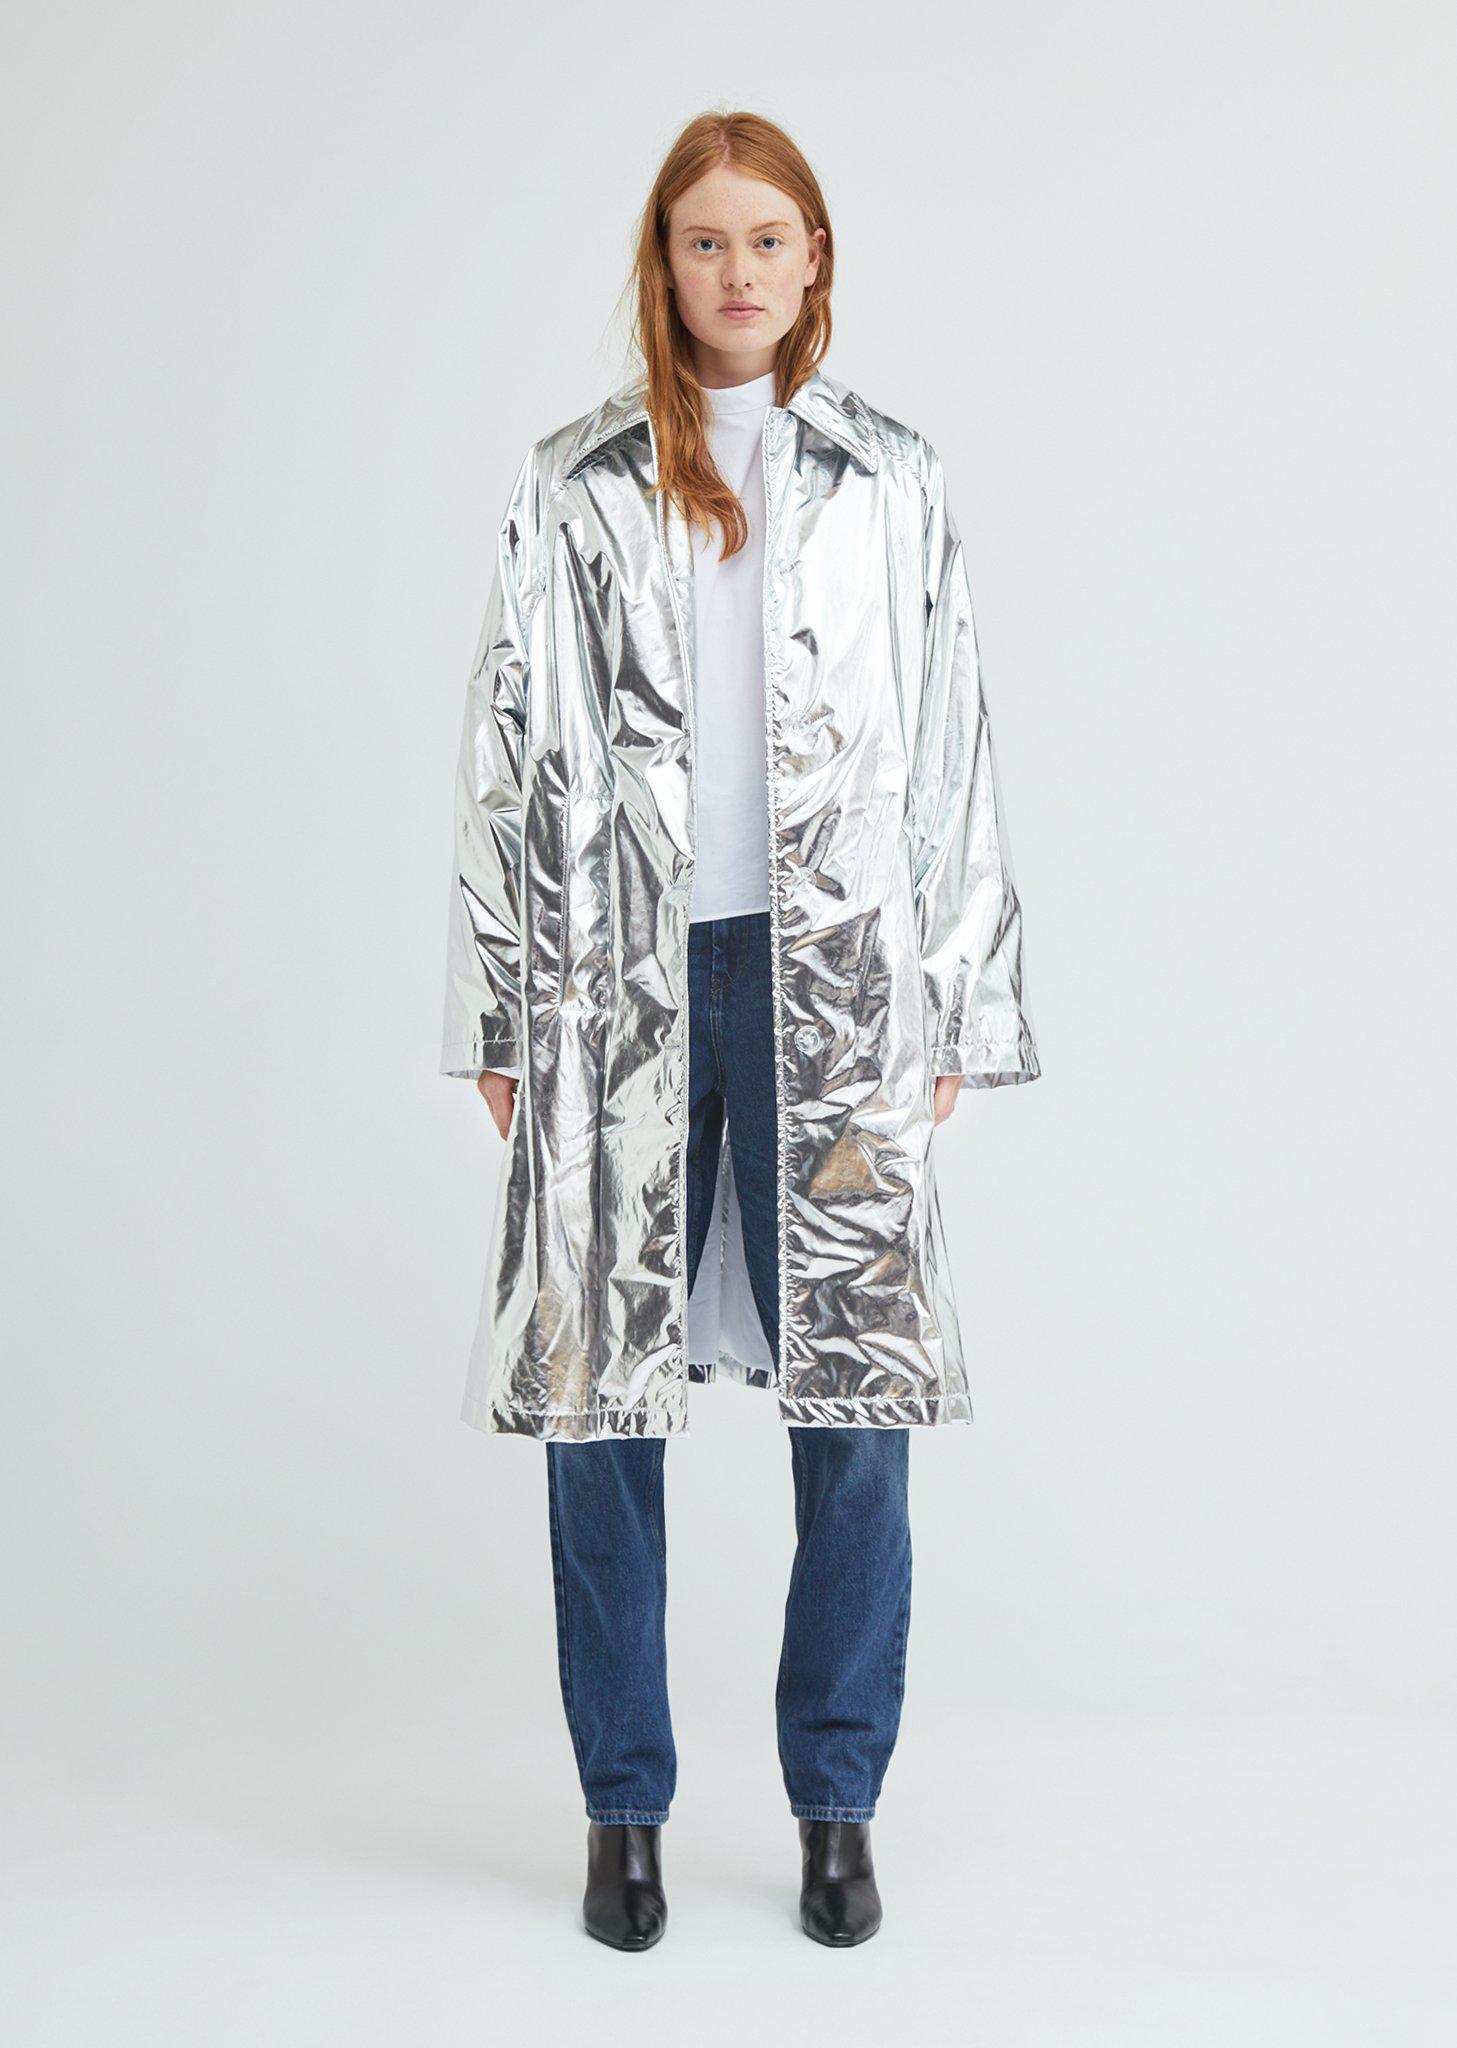 Lyst - Mm6 By Maison Martin Margiela Silver Trench Coat in Metallic